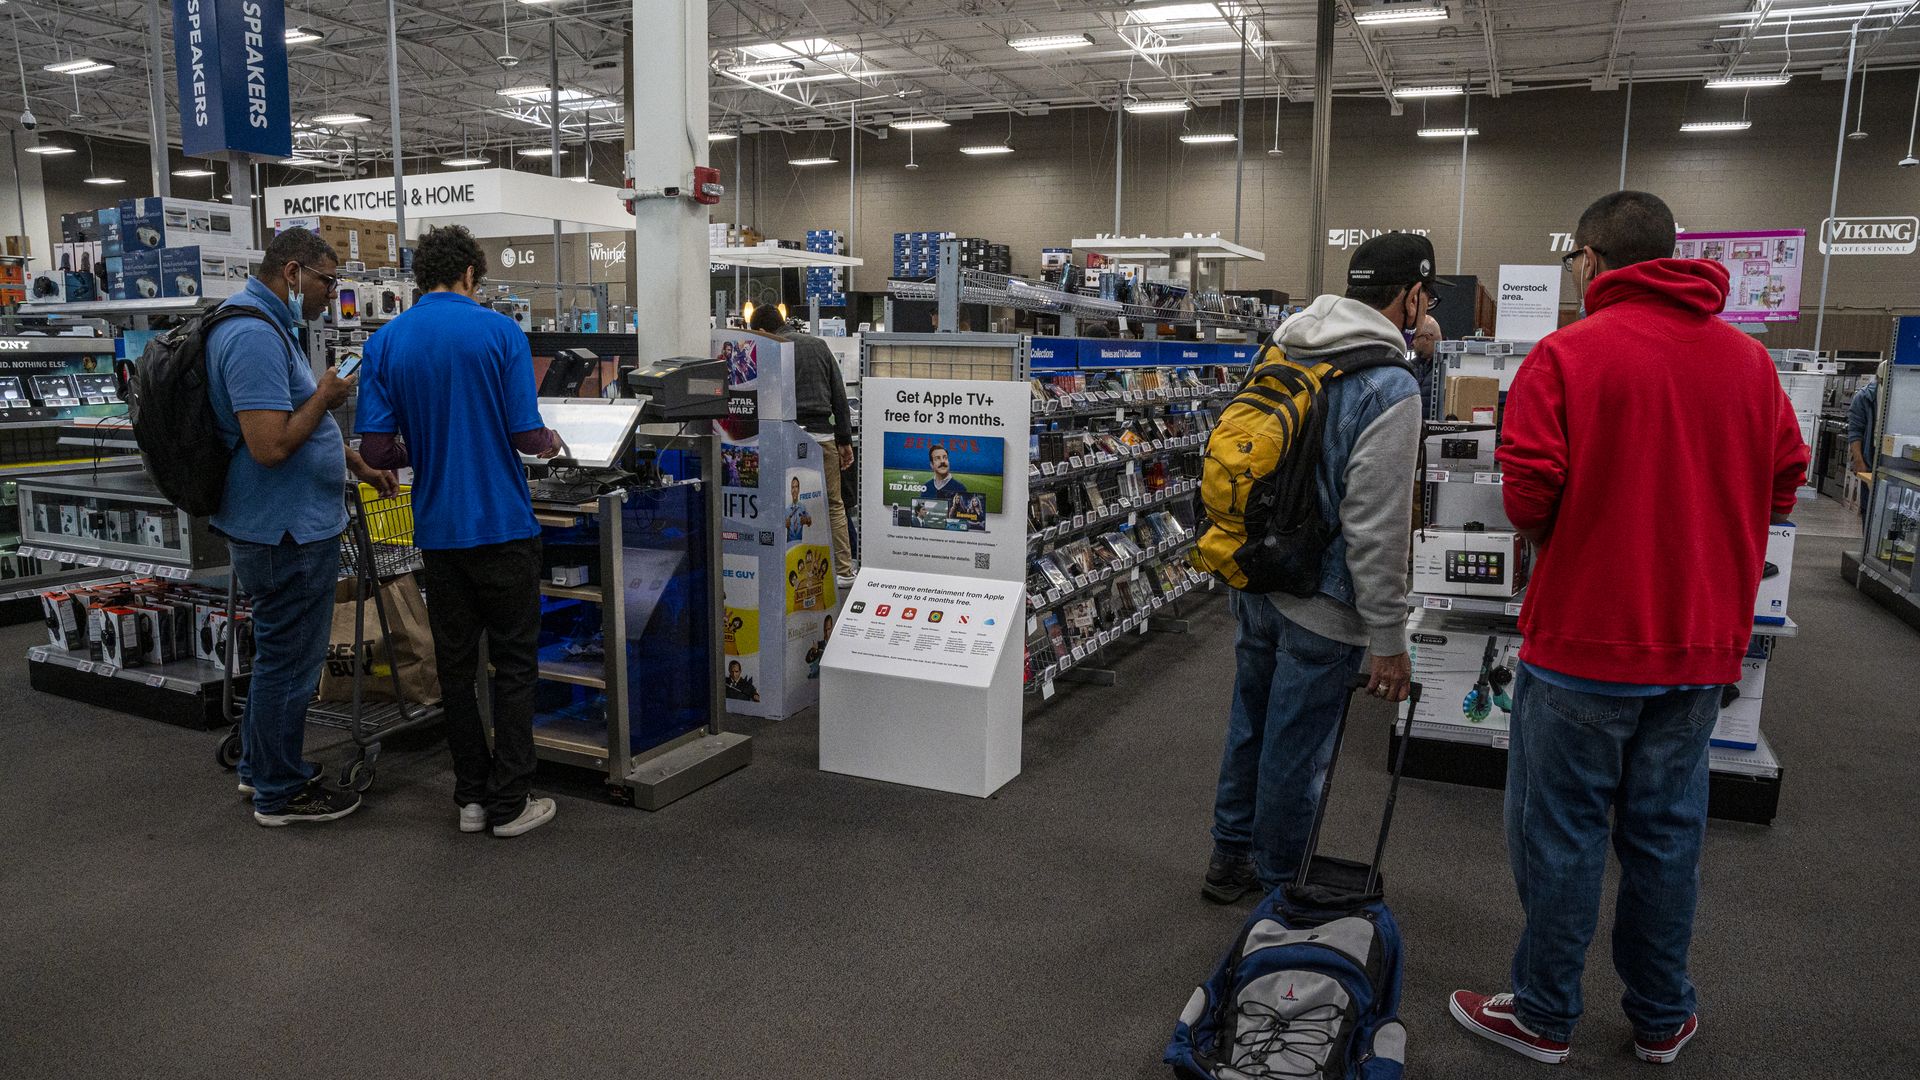 Best Buy's future plans include closing stores and shrinking floors